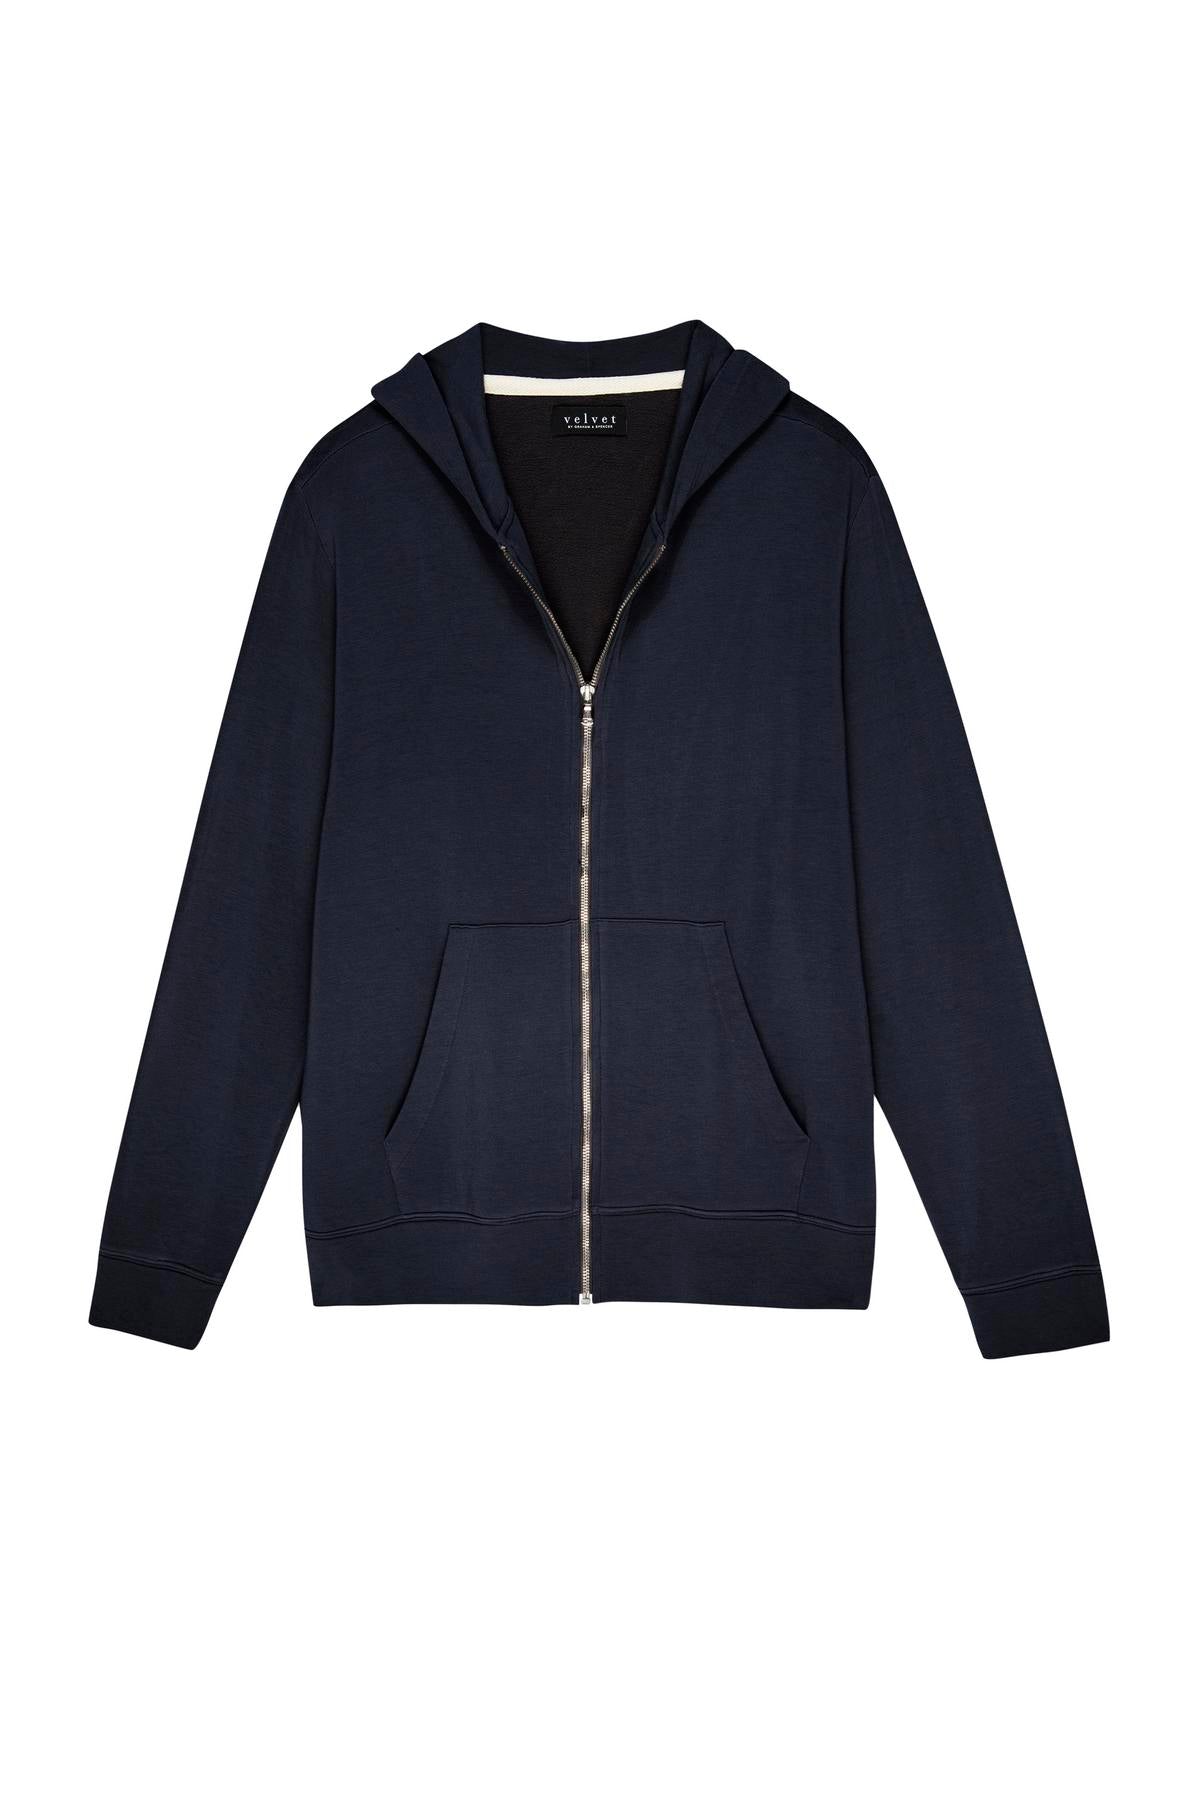 A RODAN LUXE FLEECE ZIP HOODIE by Velvet by Graham & Spencer, perfect for gym-class details and featuring a cozy interior.-35678691950785